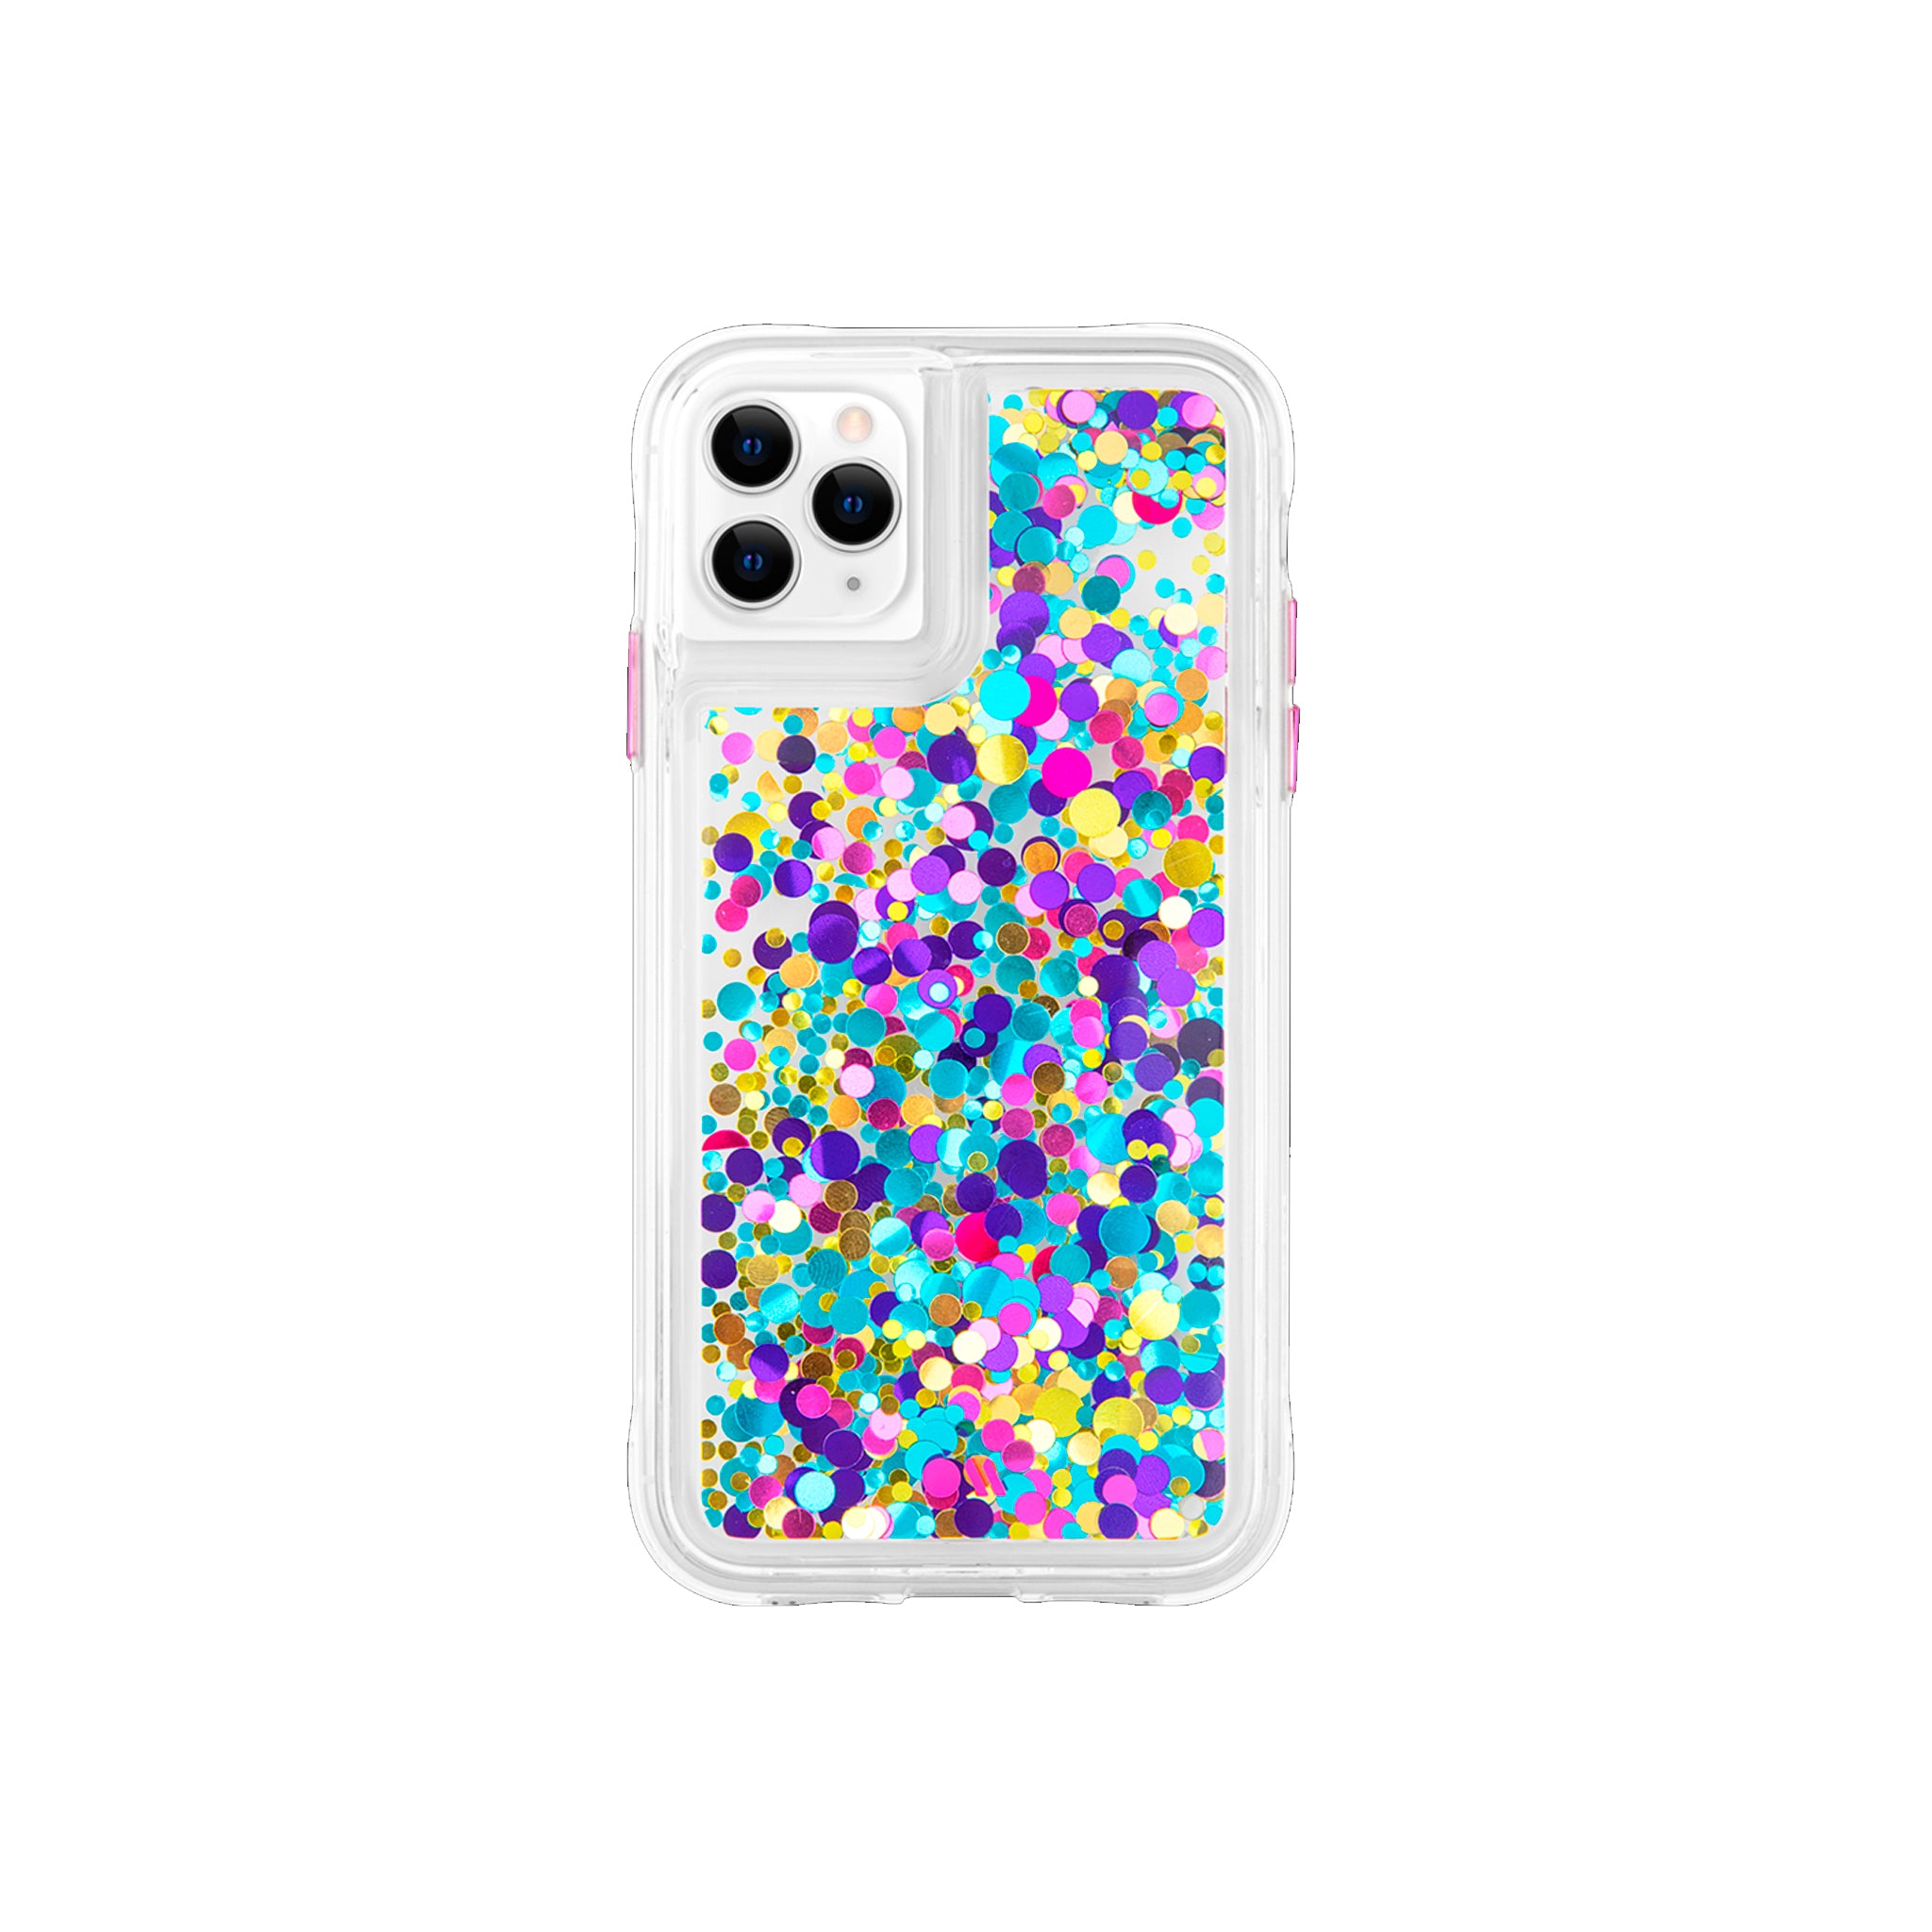 Case-mate - Waterfall Case For Apple Iphone 11 Pro Max - Confetti